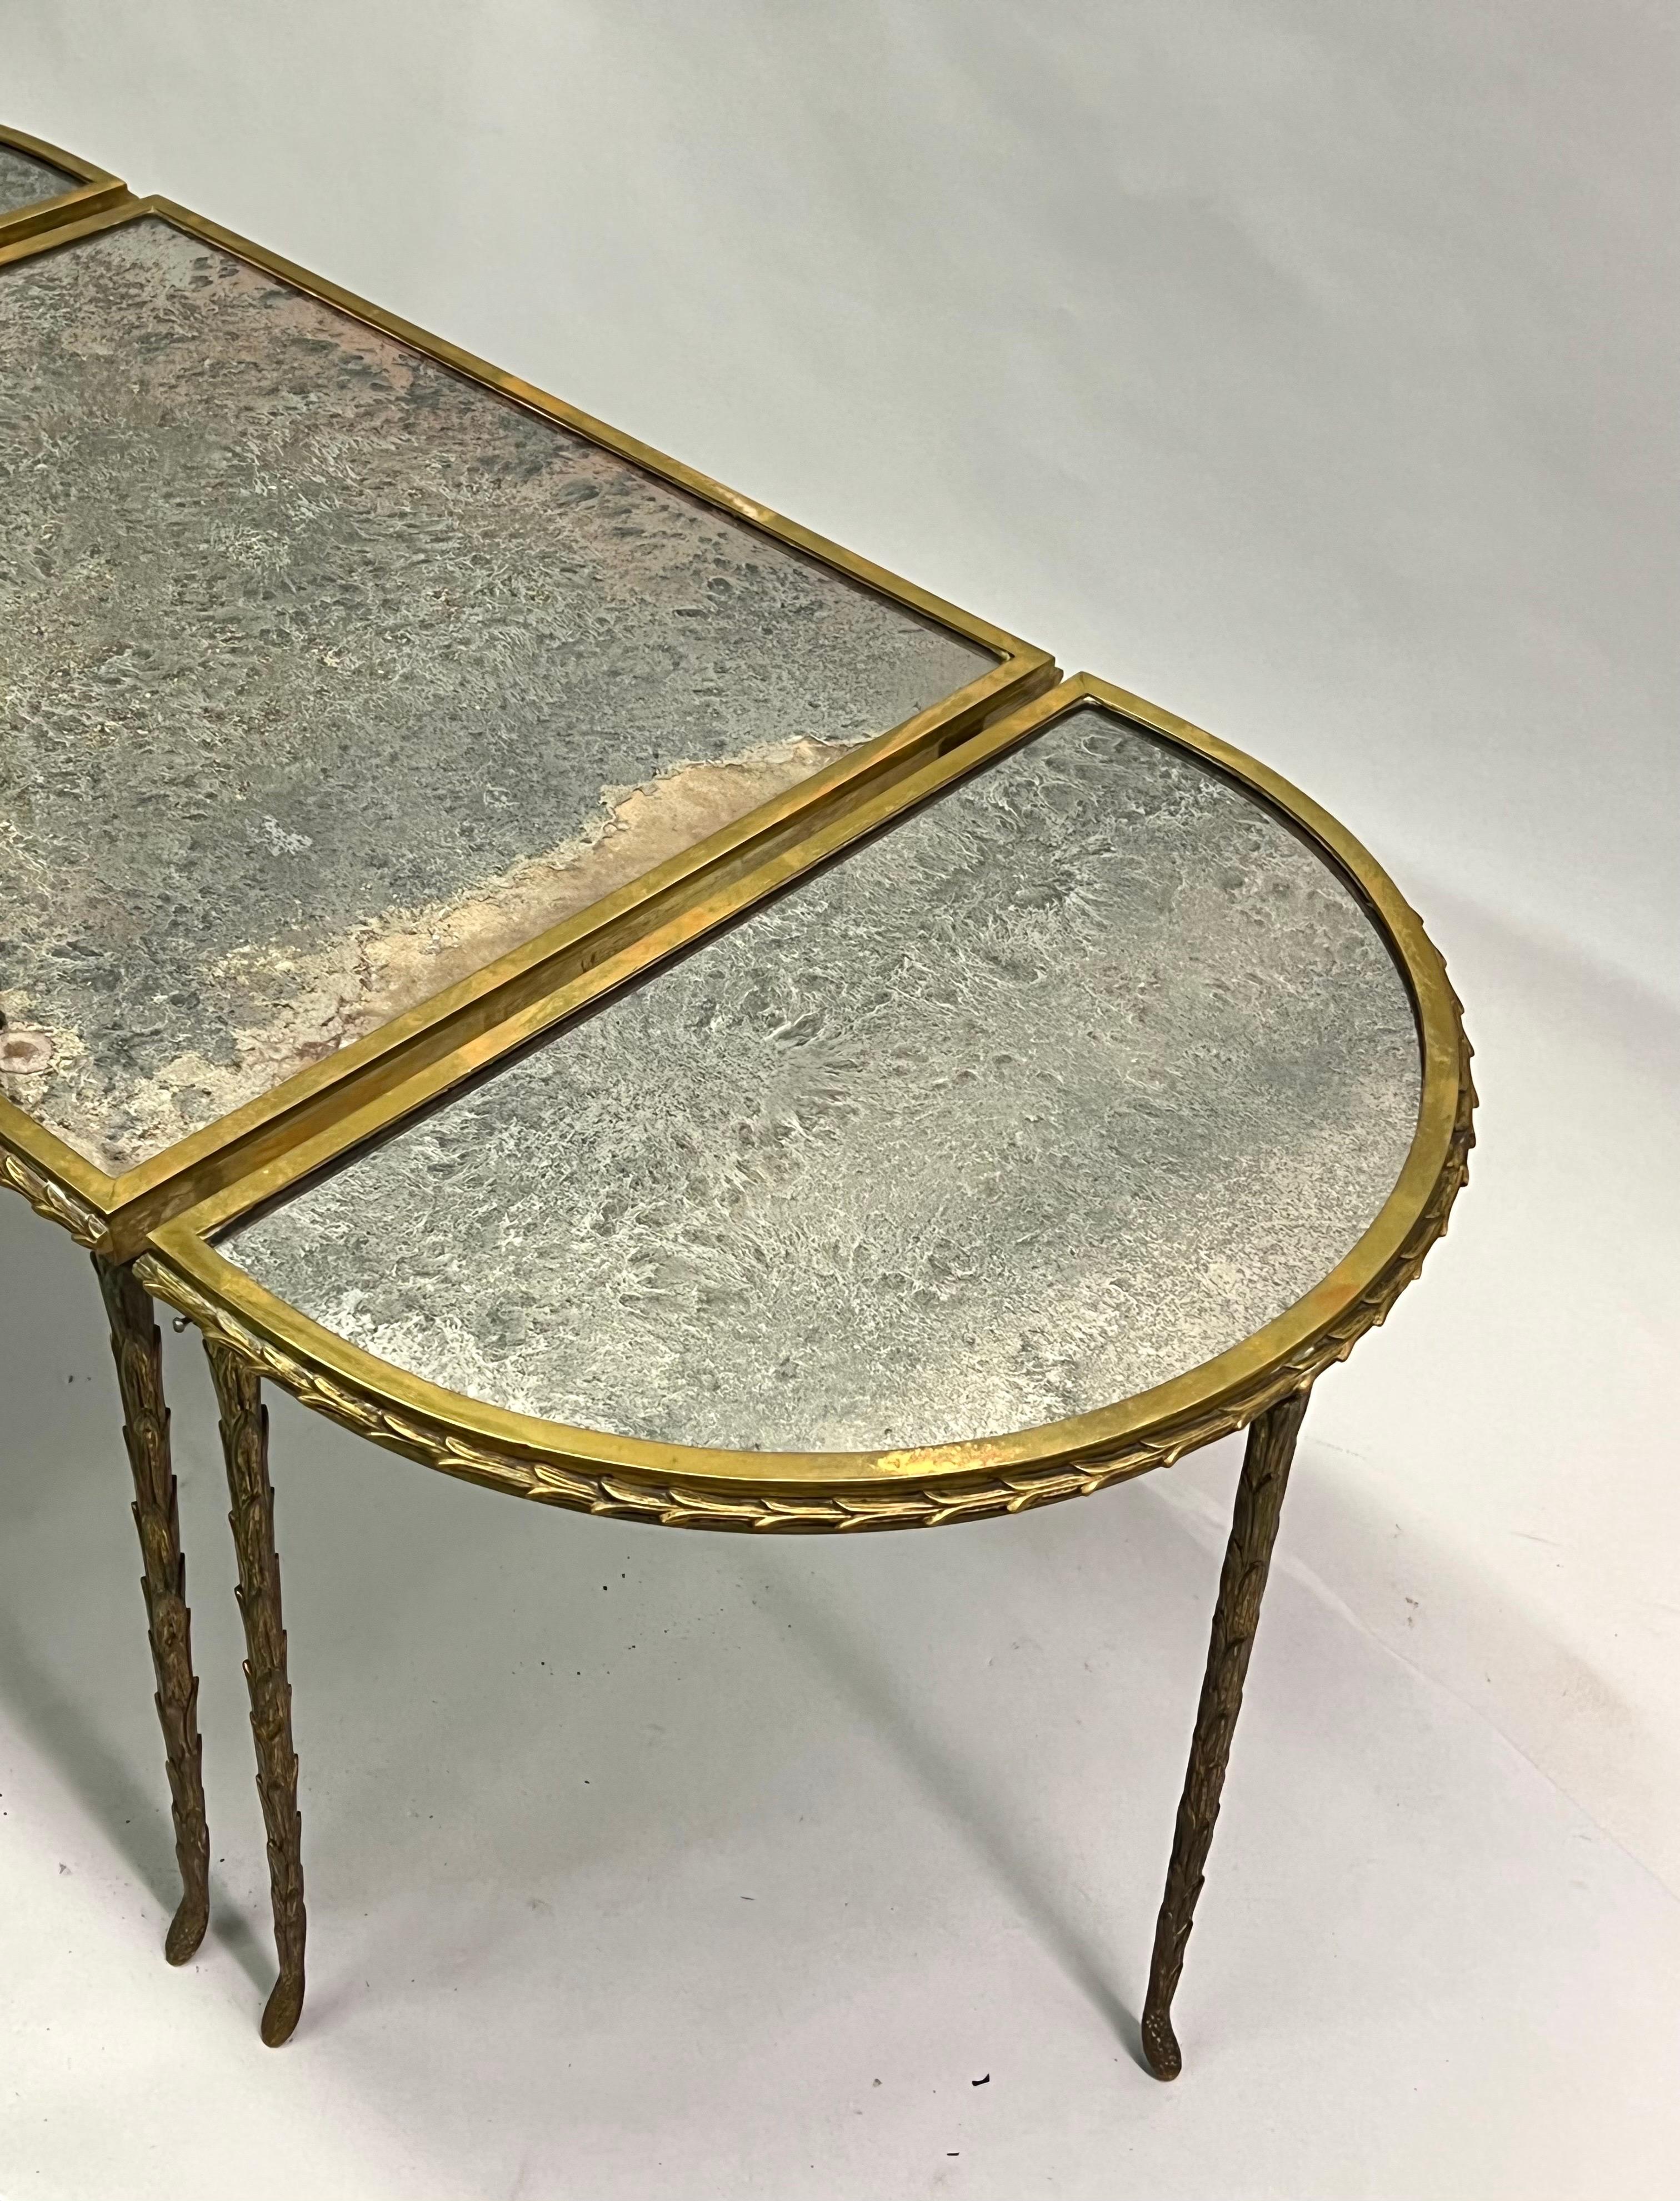 Patinated French Midcentury 3 Part Gilt Bronze Faux Bamboo Coffee Table by Maison Baguès